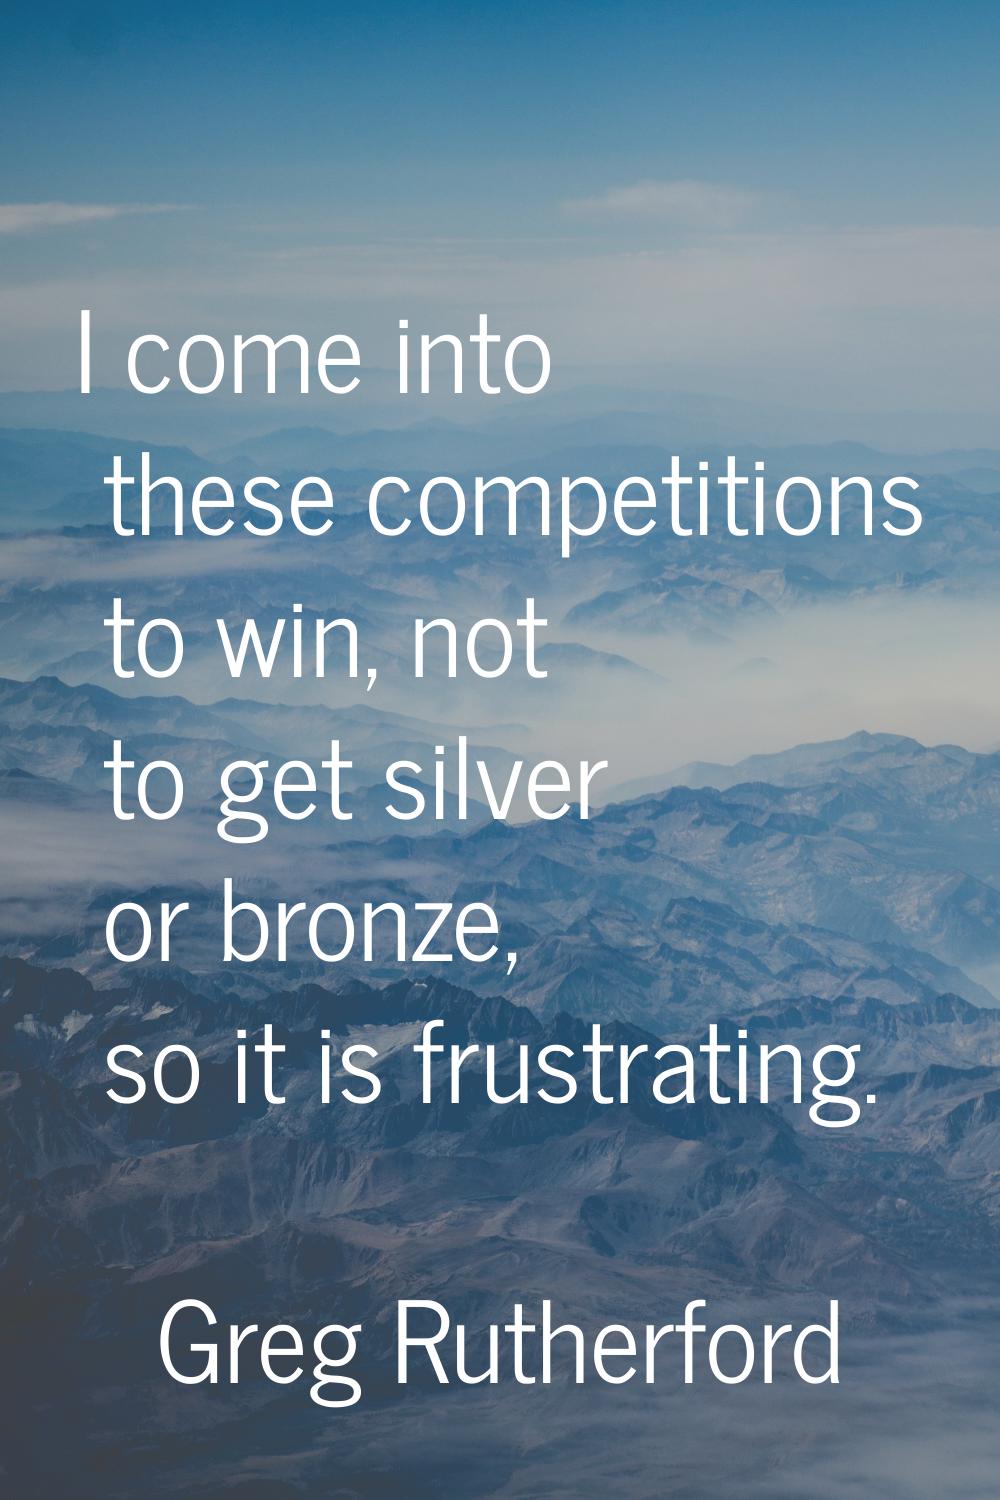 I come into these competitions to win, not to get silver or bronze, so it is frustrating.